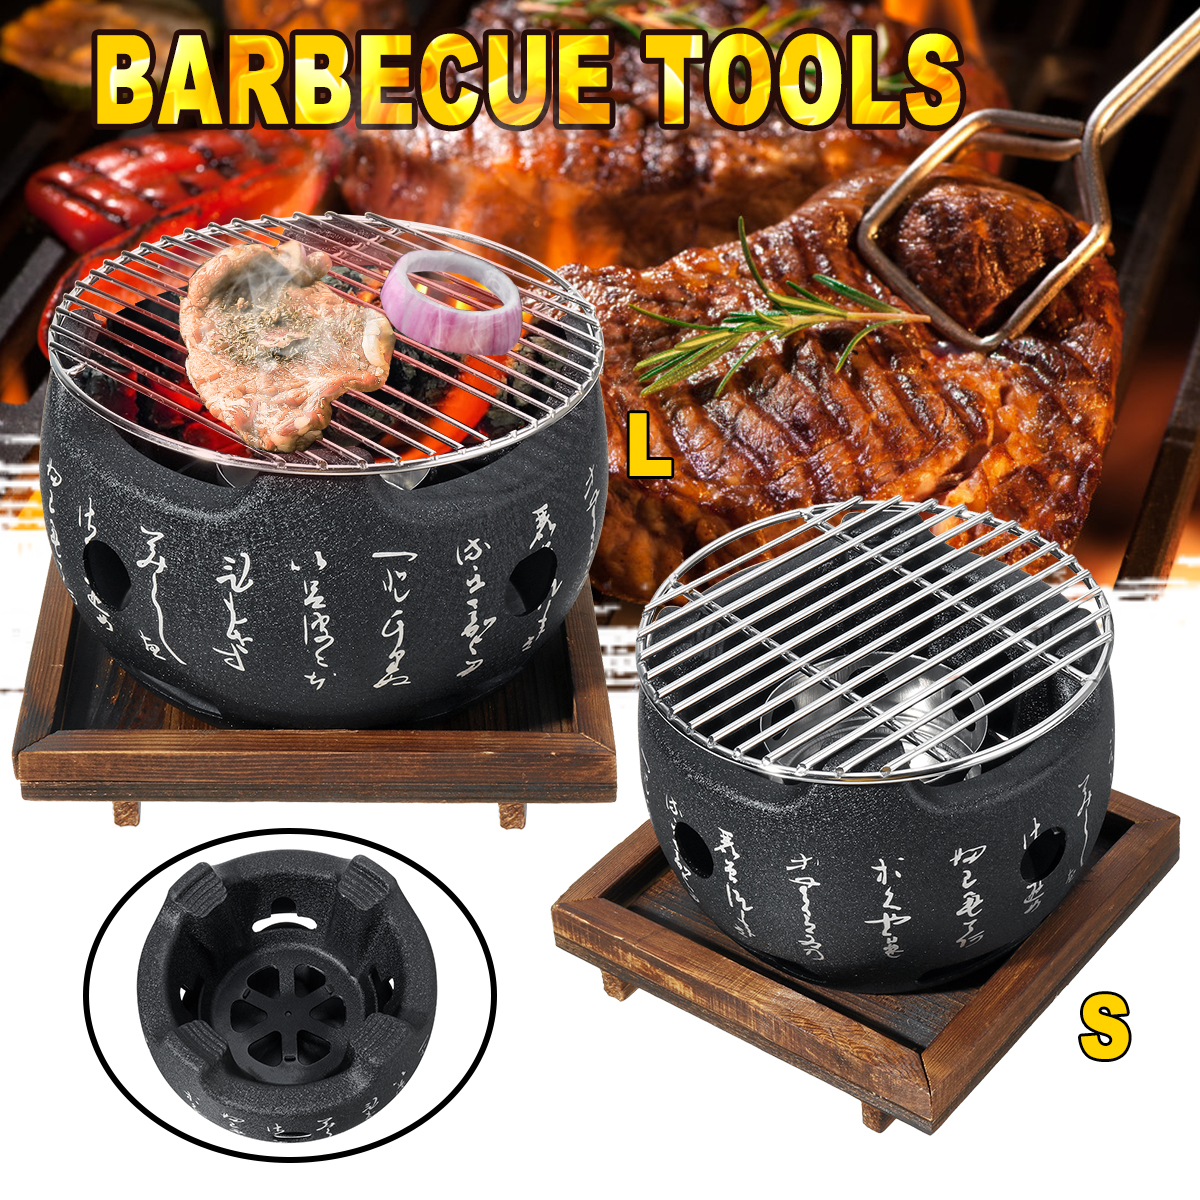 Japanese Style BBQ Grill Charcoal Grill Aluminium Alloy Portable Barbecue Tools - image 3 of 15